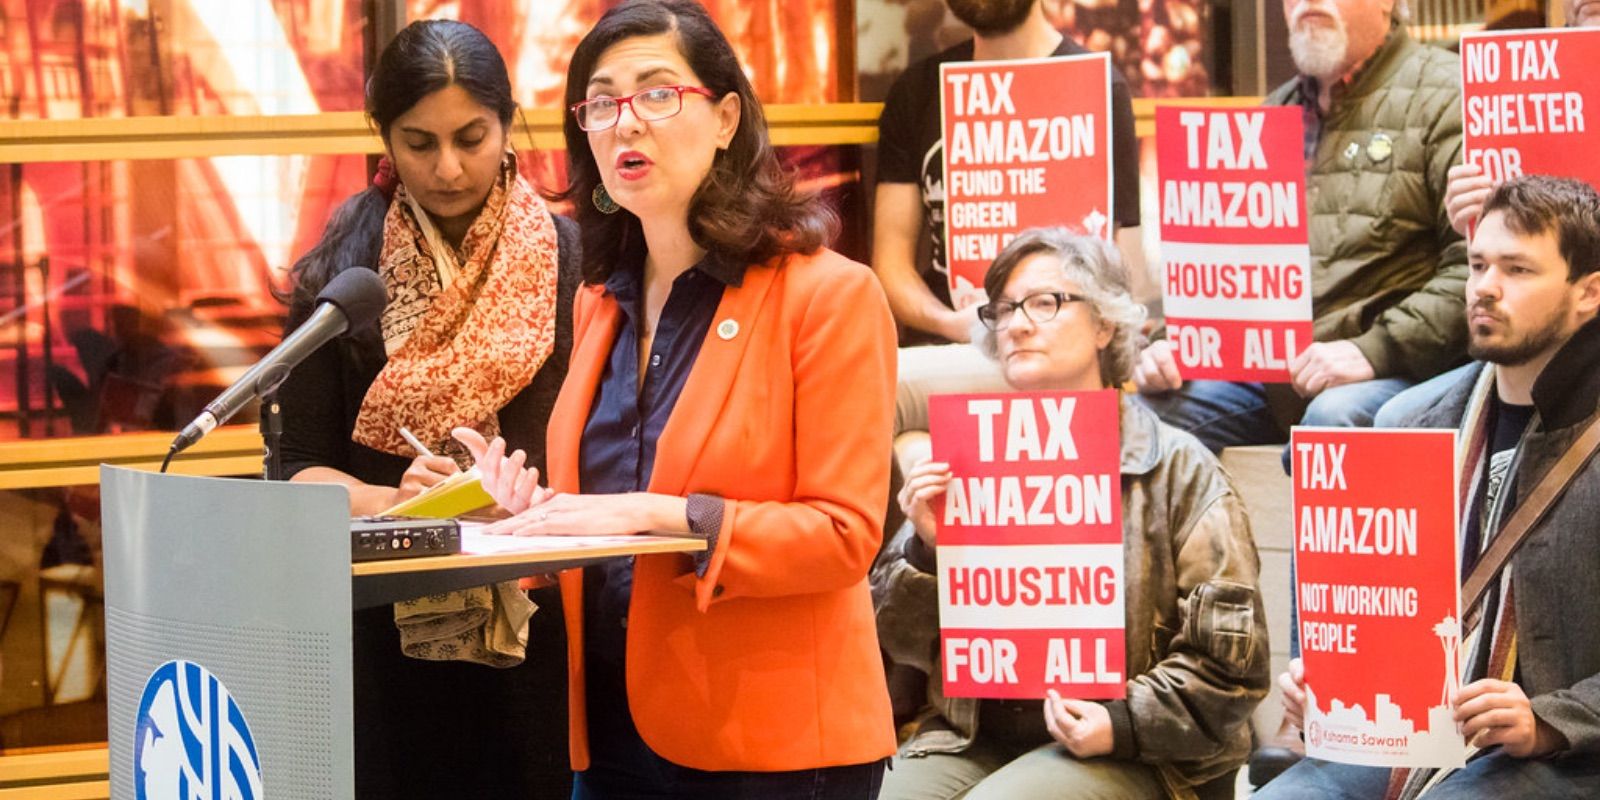 Seattle City Council bypasses process to funnel tax payer dollars to political allies